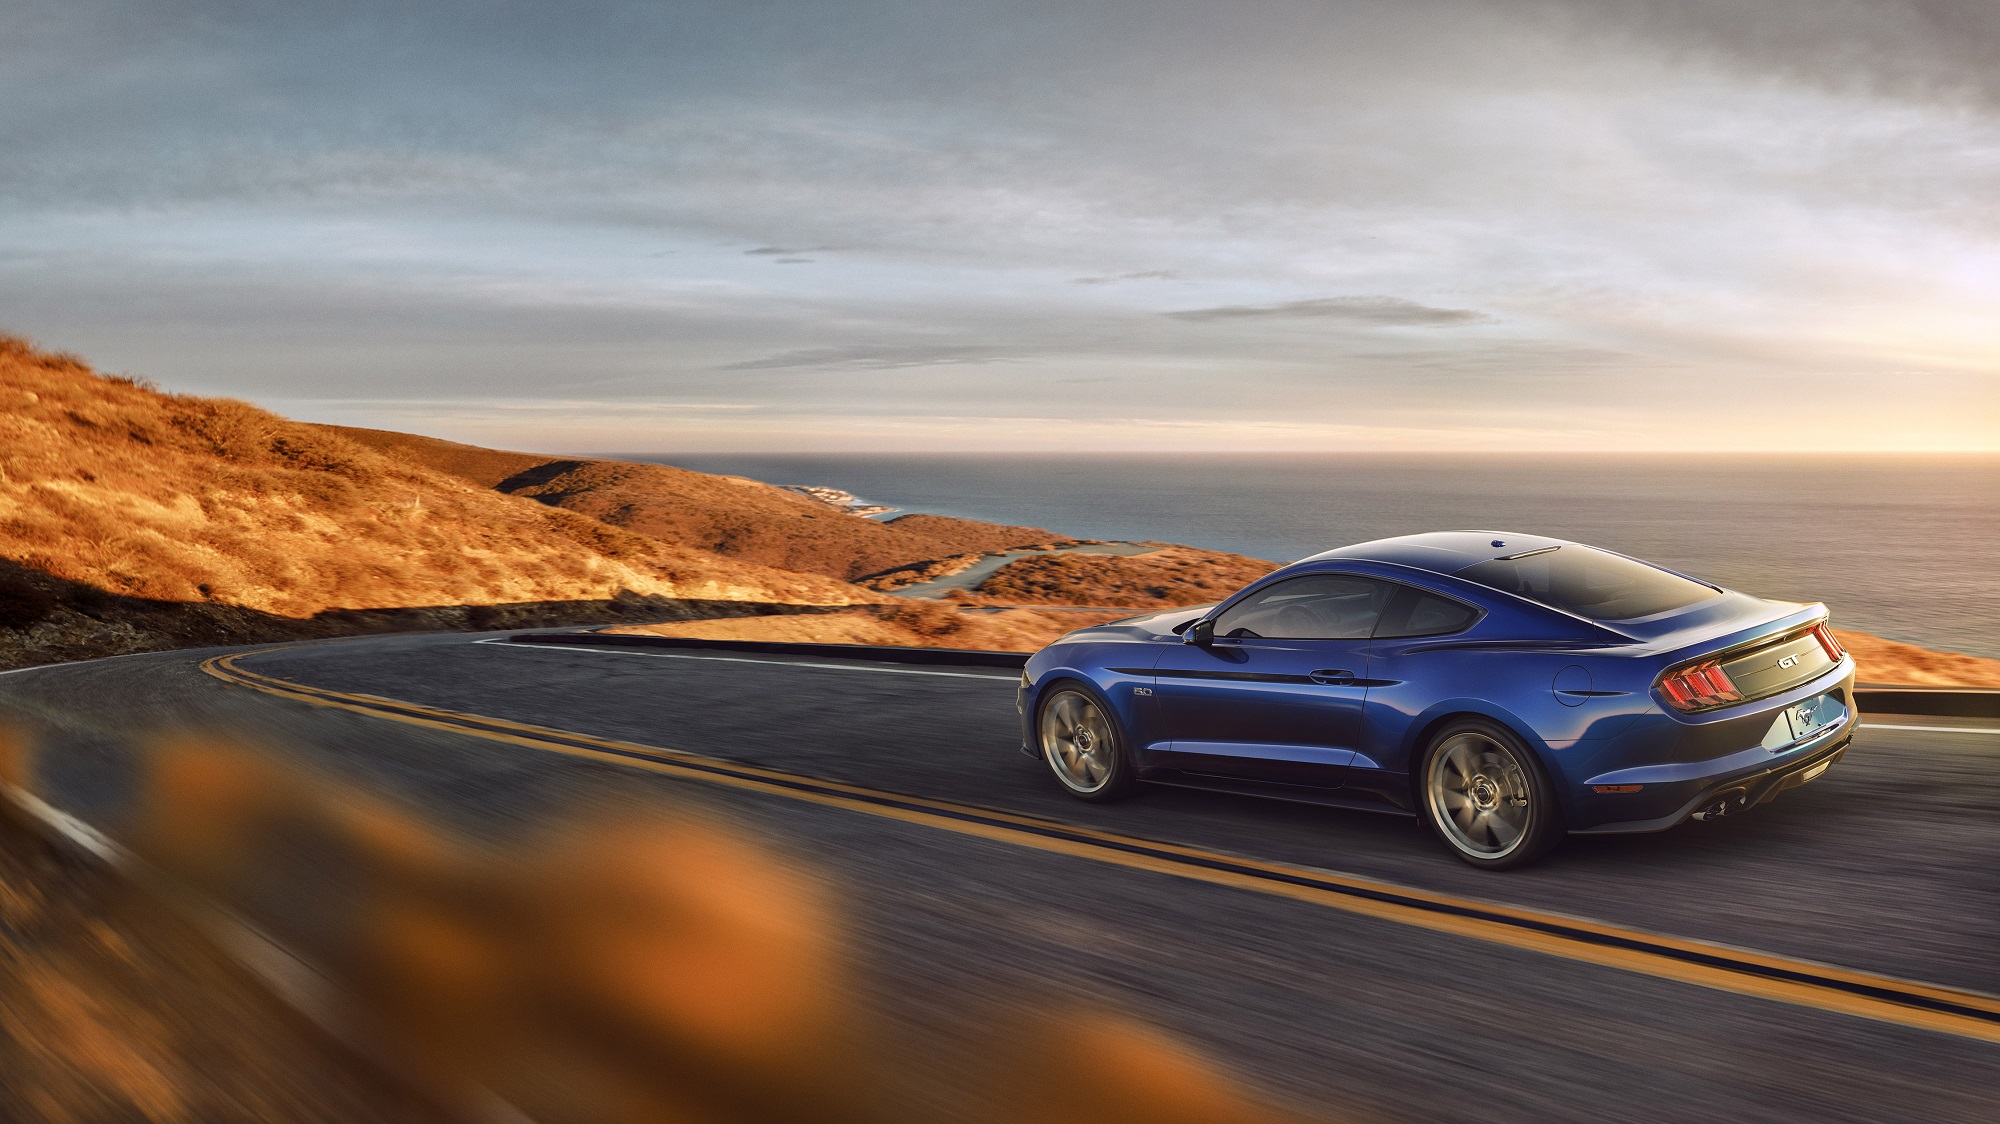 The 2023 Ford Mustang is the last S550 Mustang before Ford switches to the S650 Mustang.